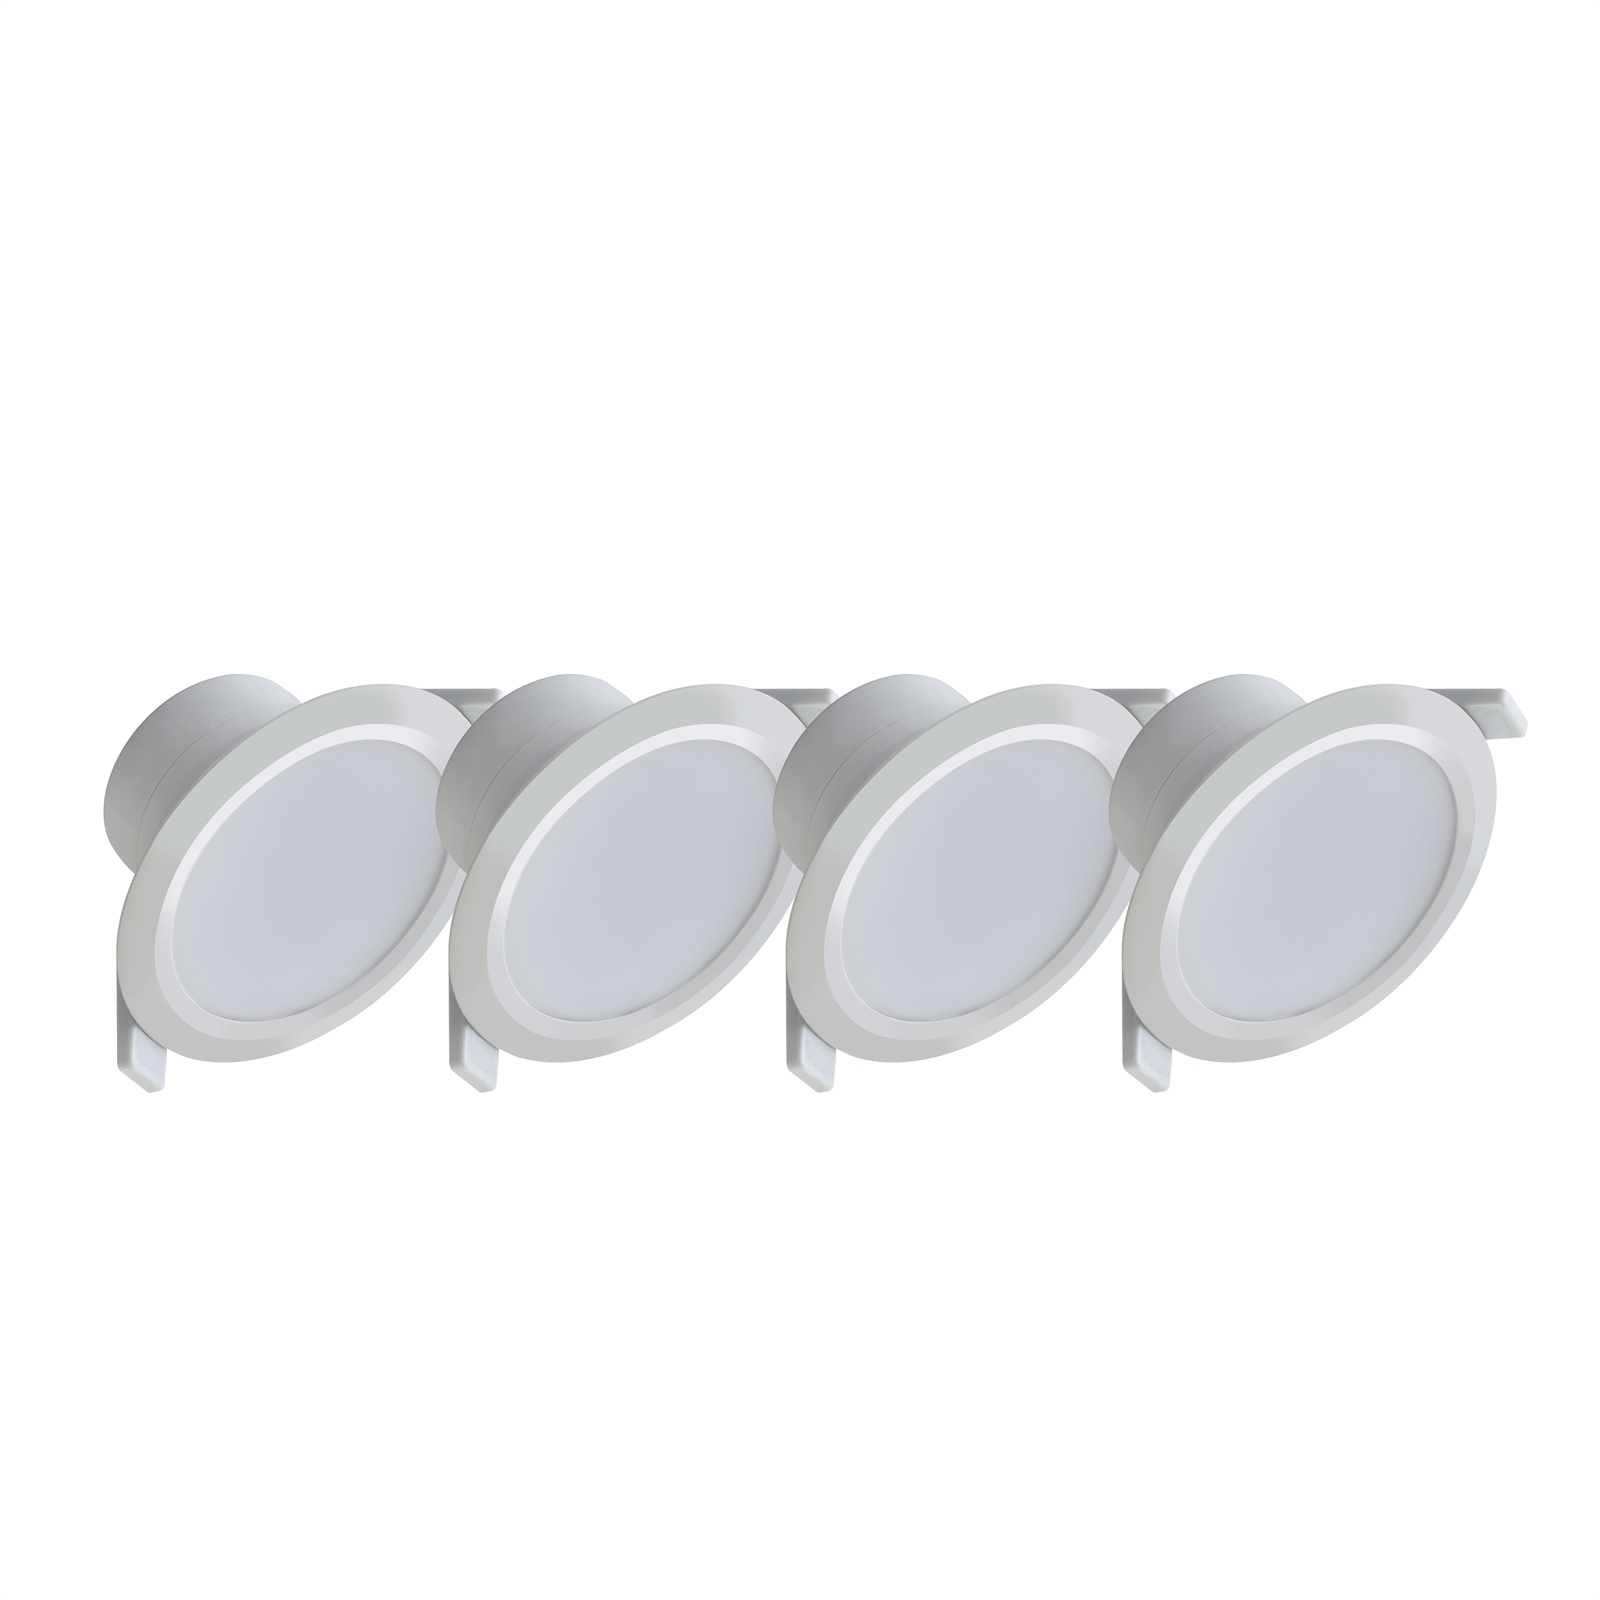 Deta 12W Warm White LED Dimmable Downlight  - 4 Pack